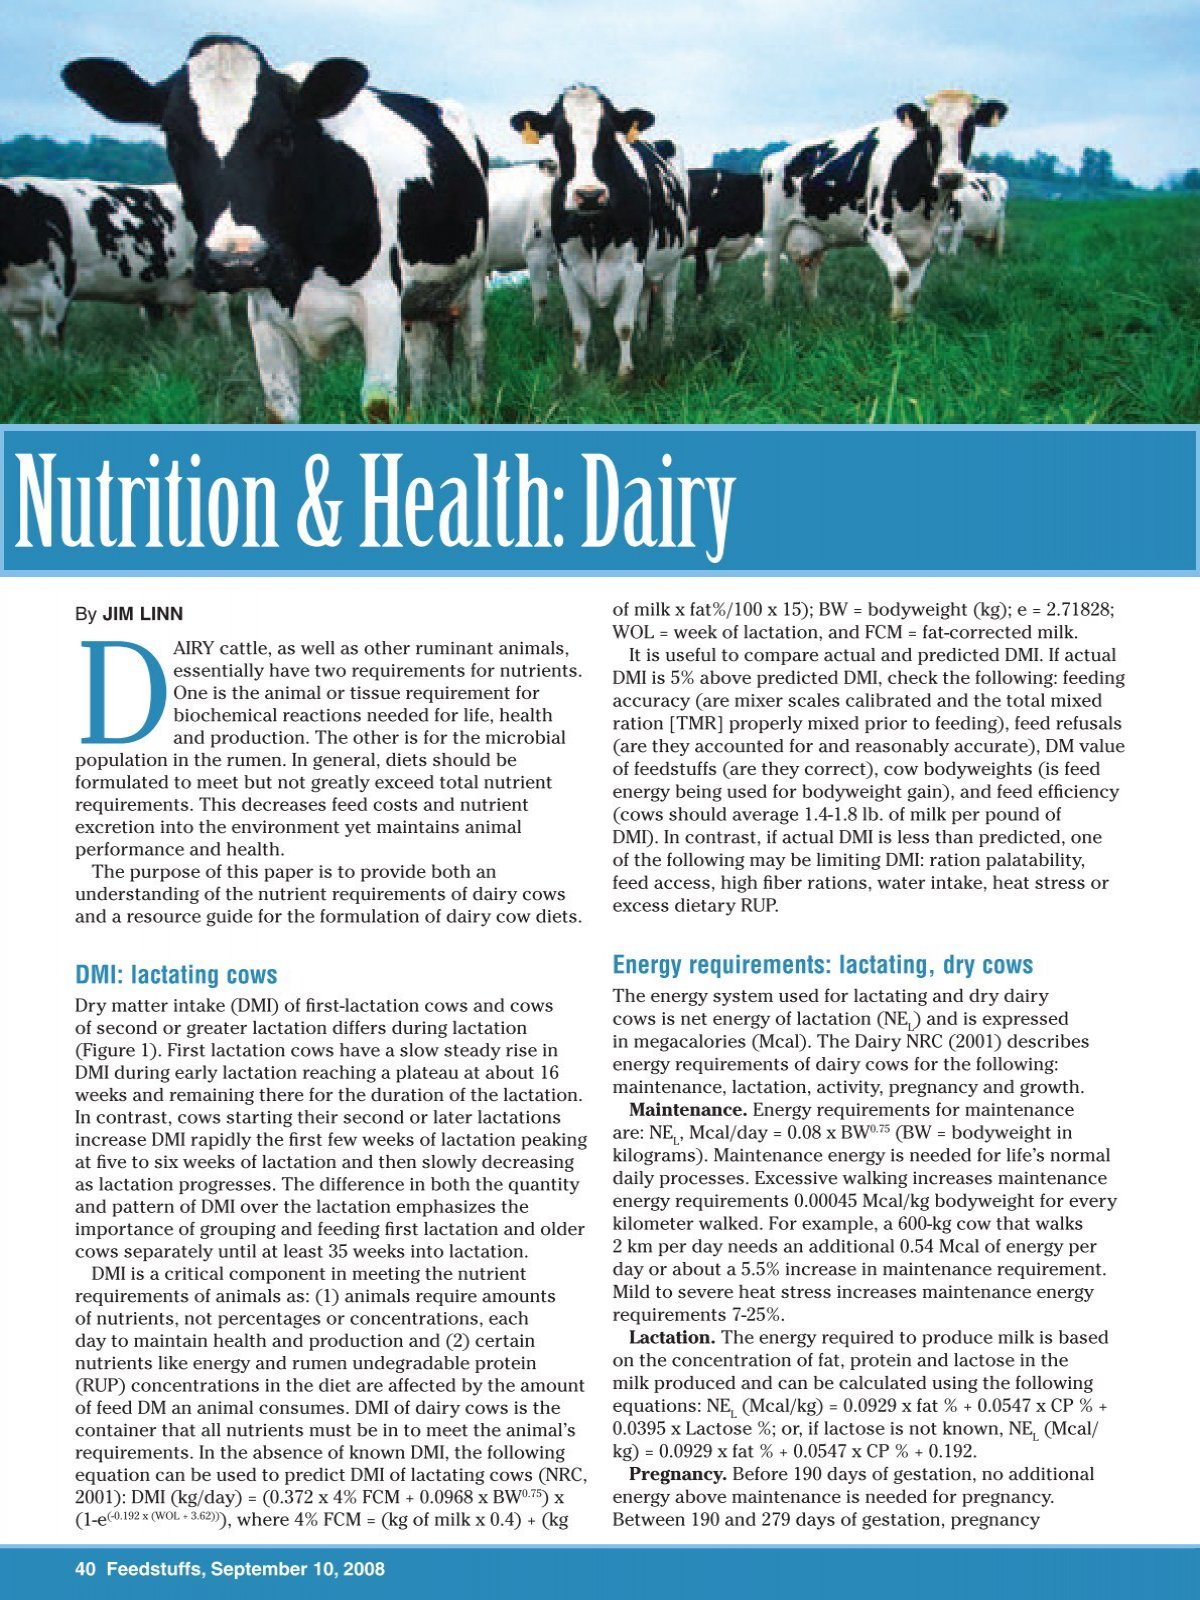 Nutrient Requirements Of Dairy Cattle